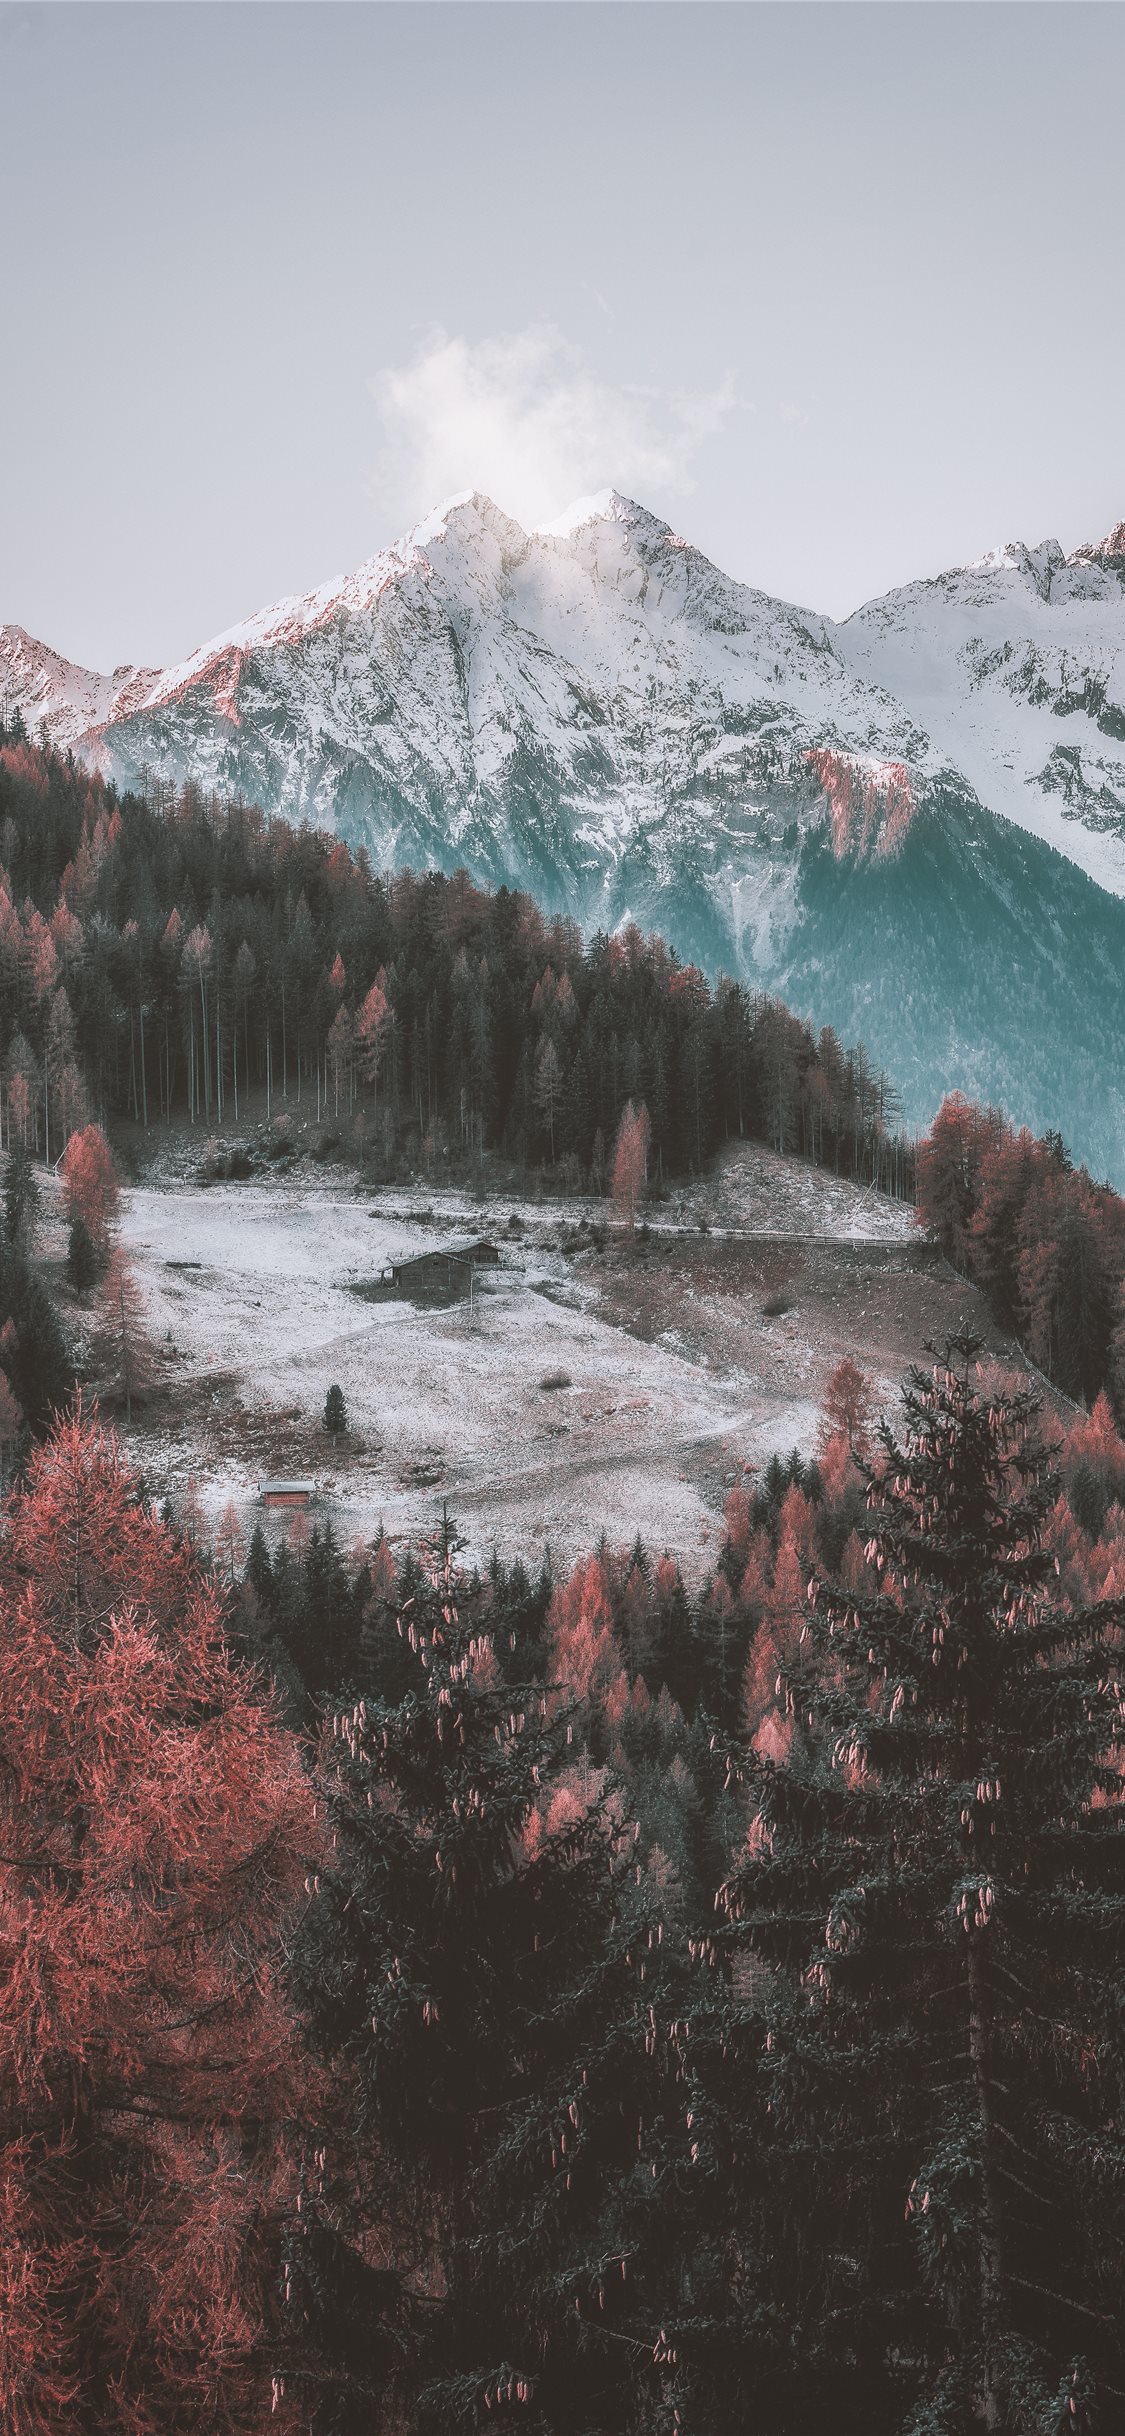 Icy Mountain And Green Trees Scenry iPhone X Wallpaper